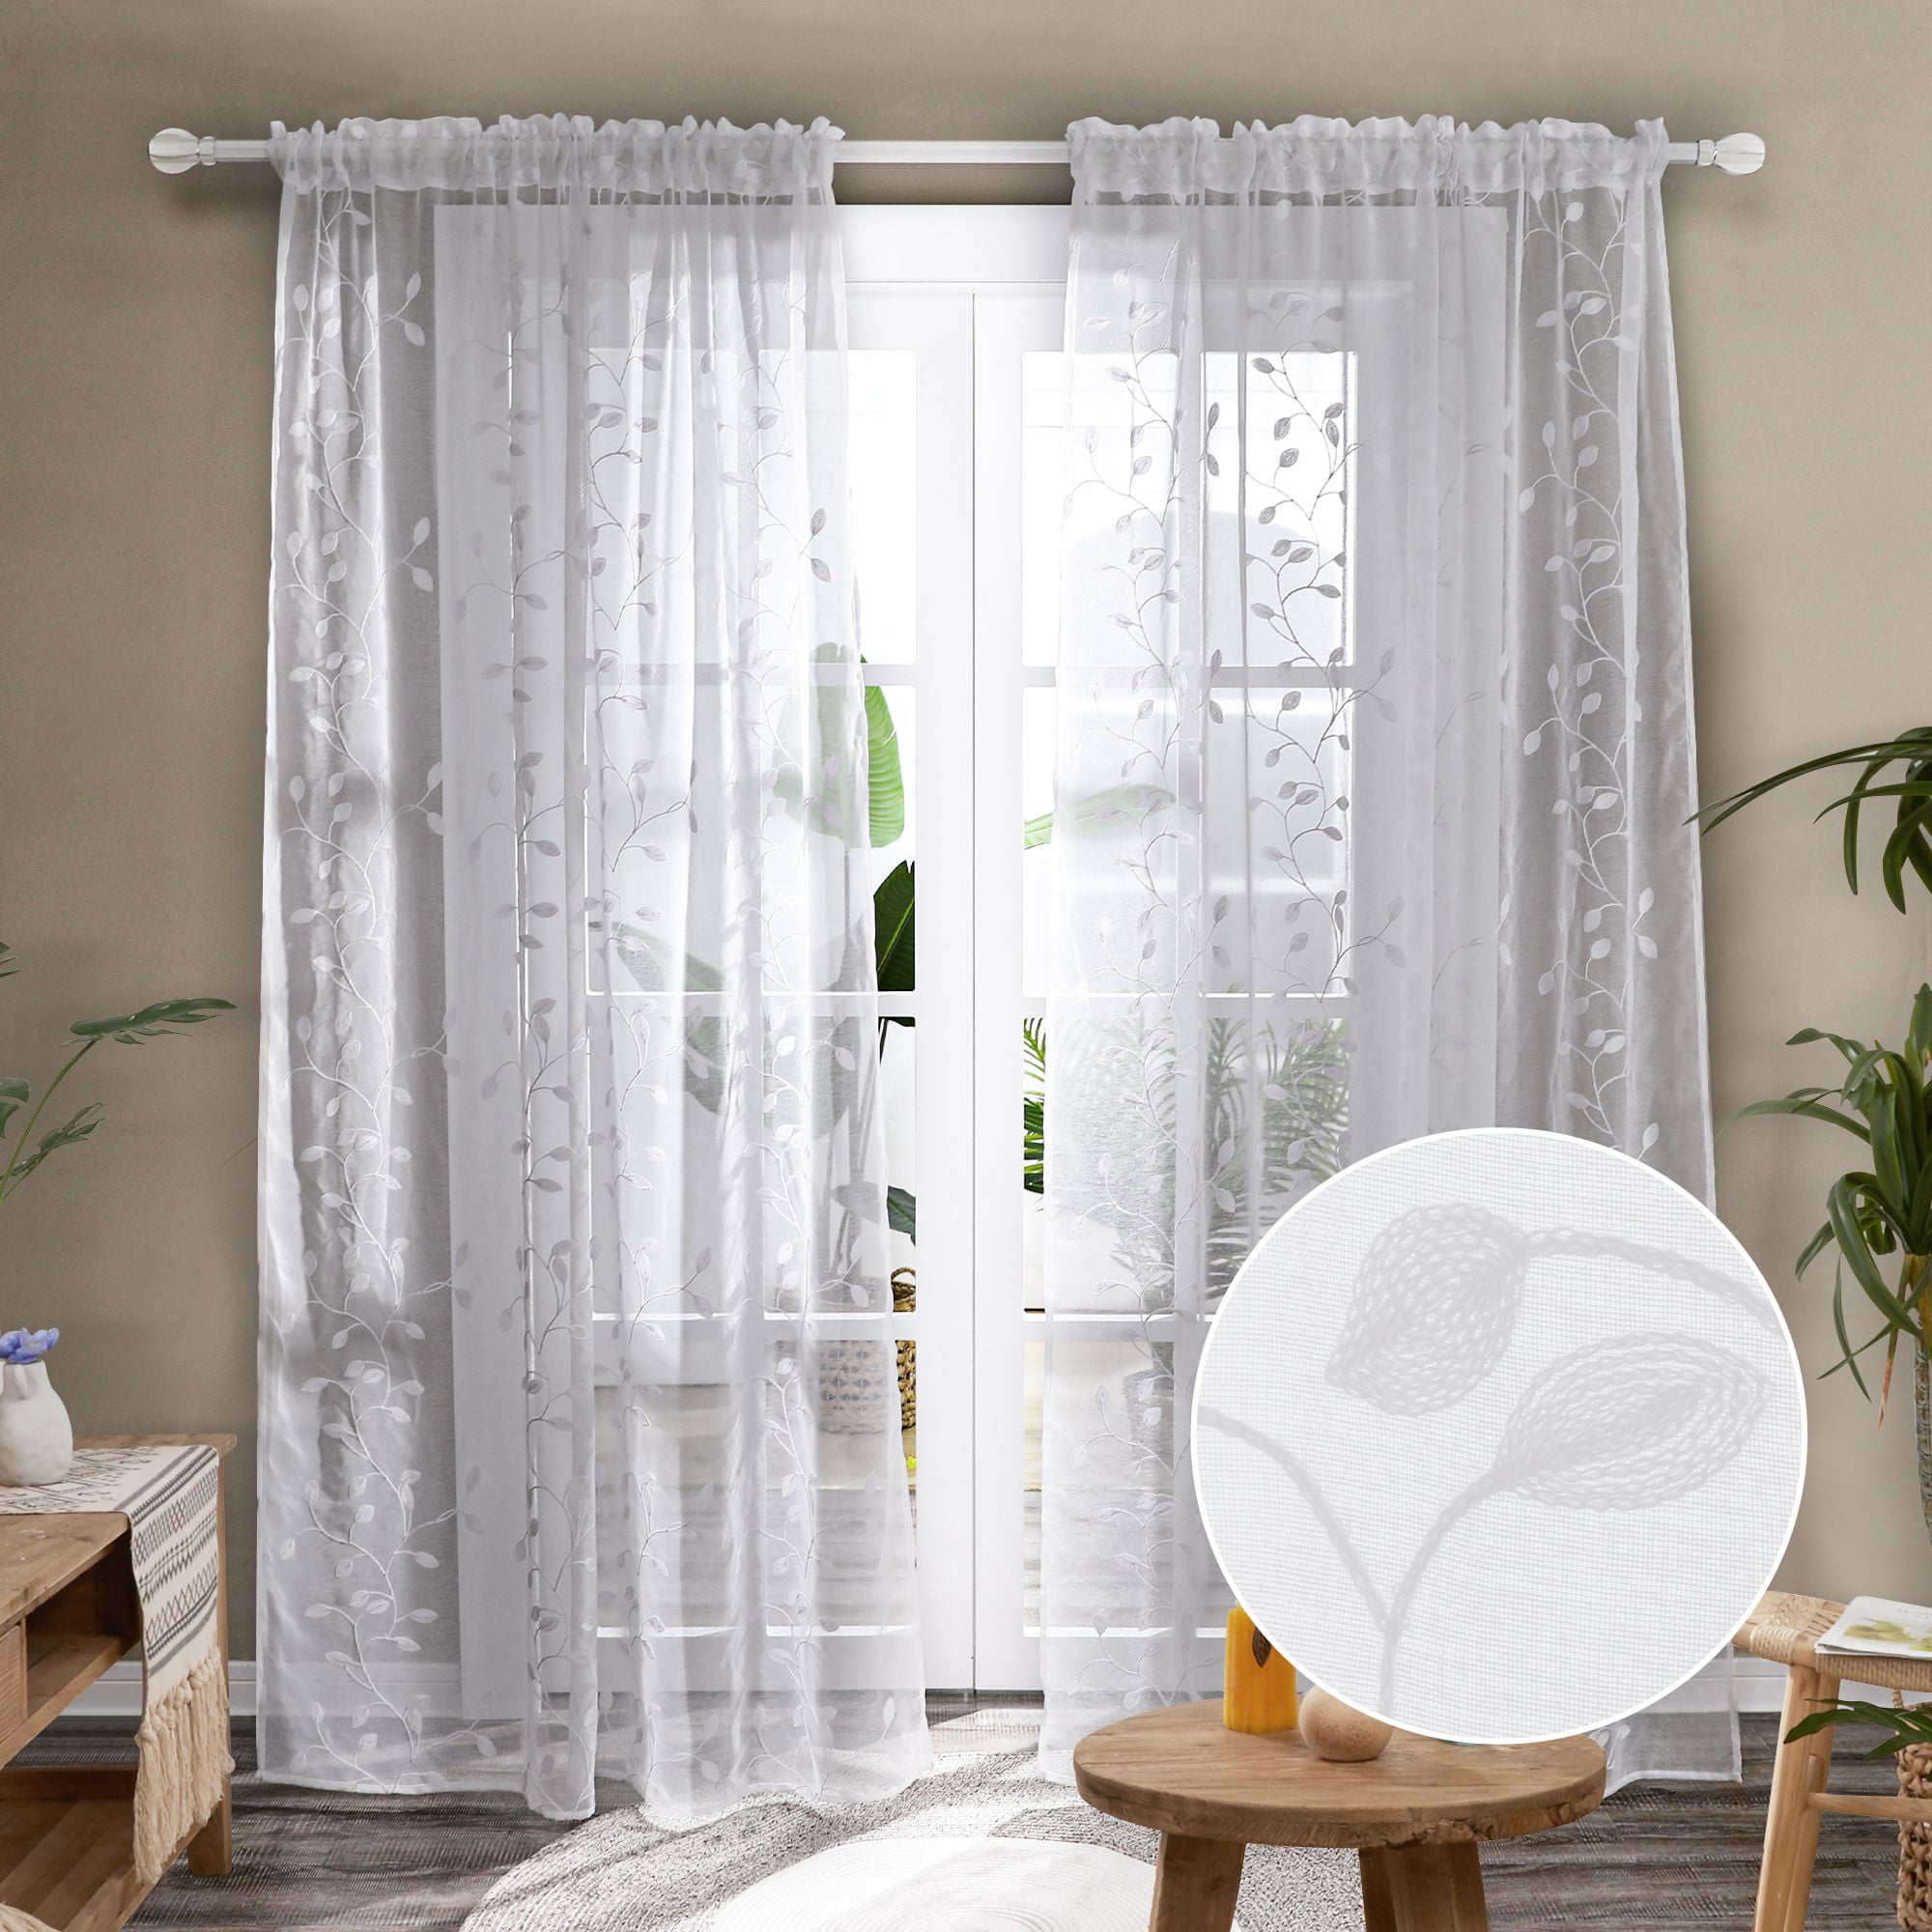 Miuco Sheer Curtains 84 Inch Long White Living Room Curtains Semi Voile Sheer Pa 